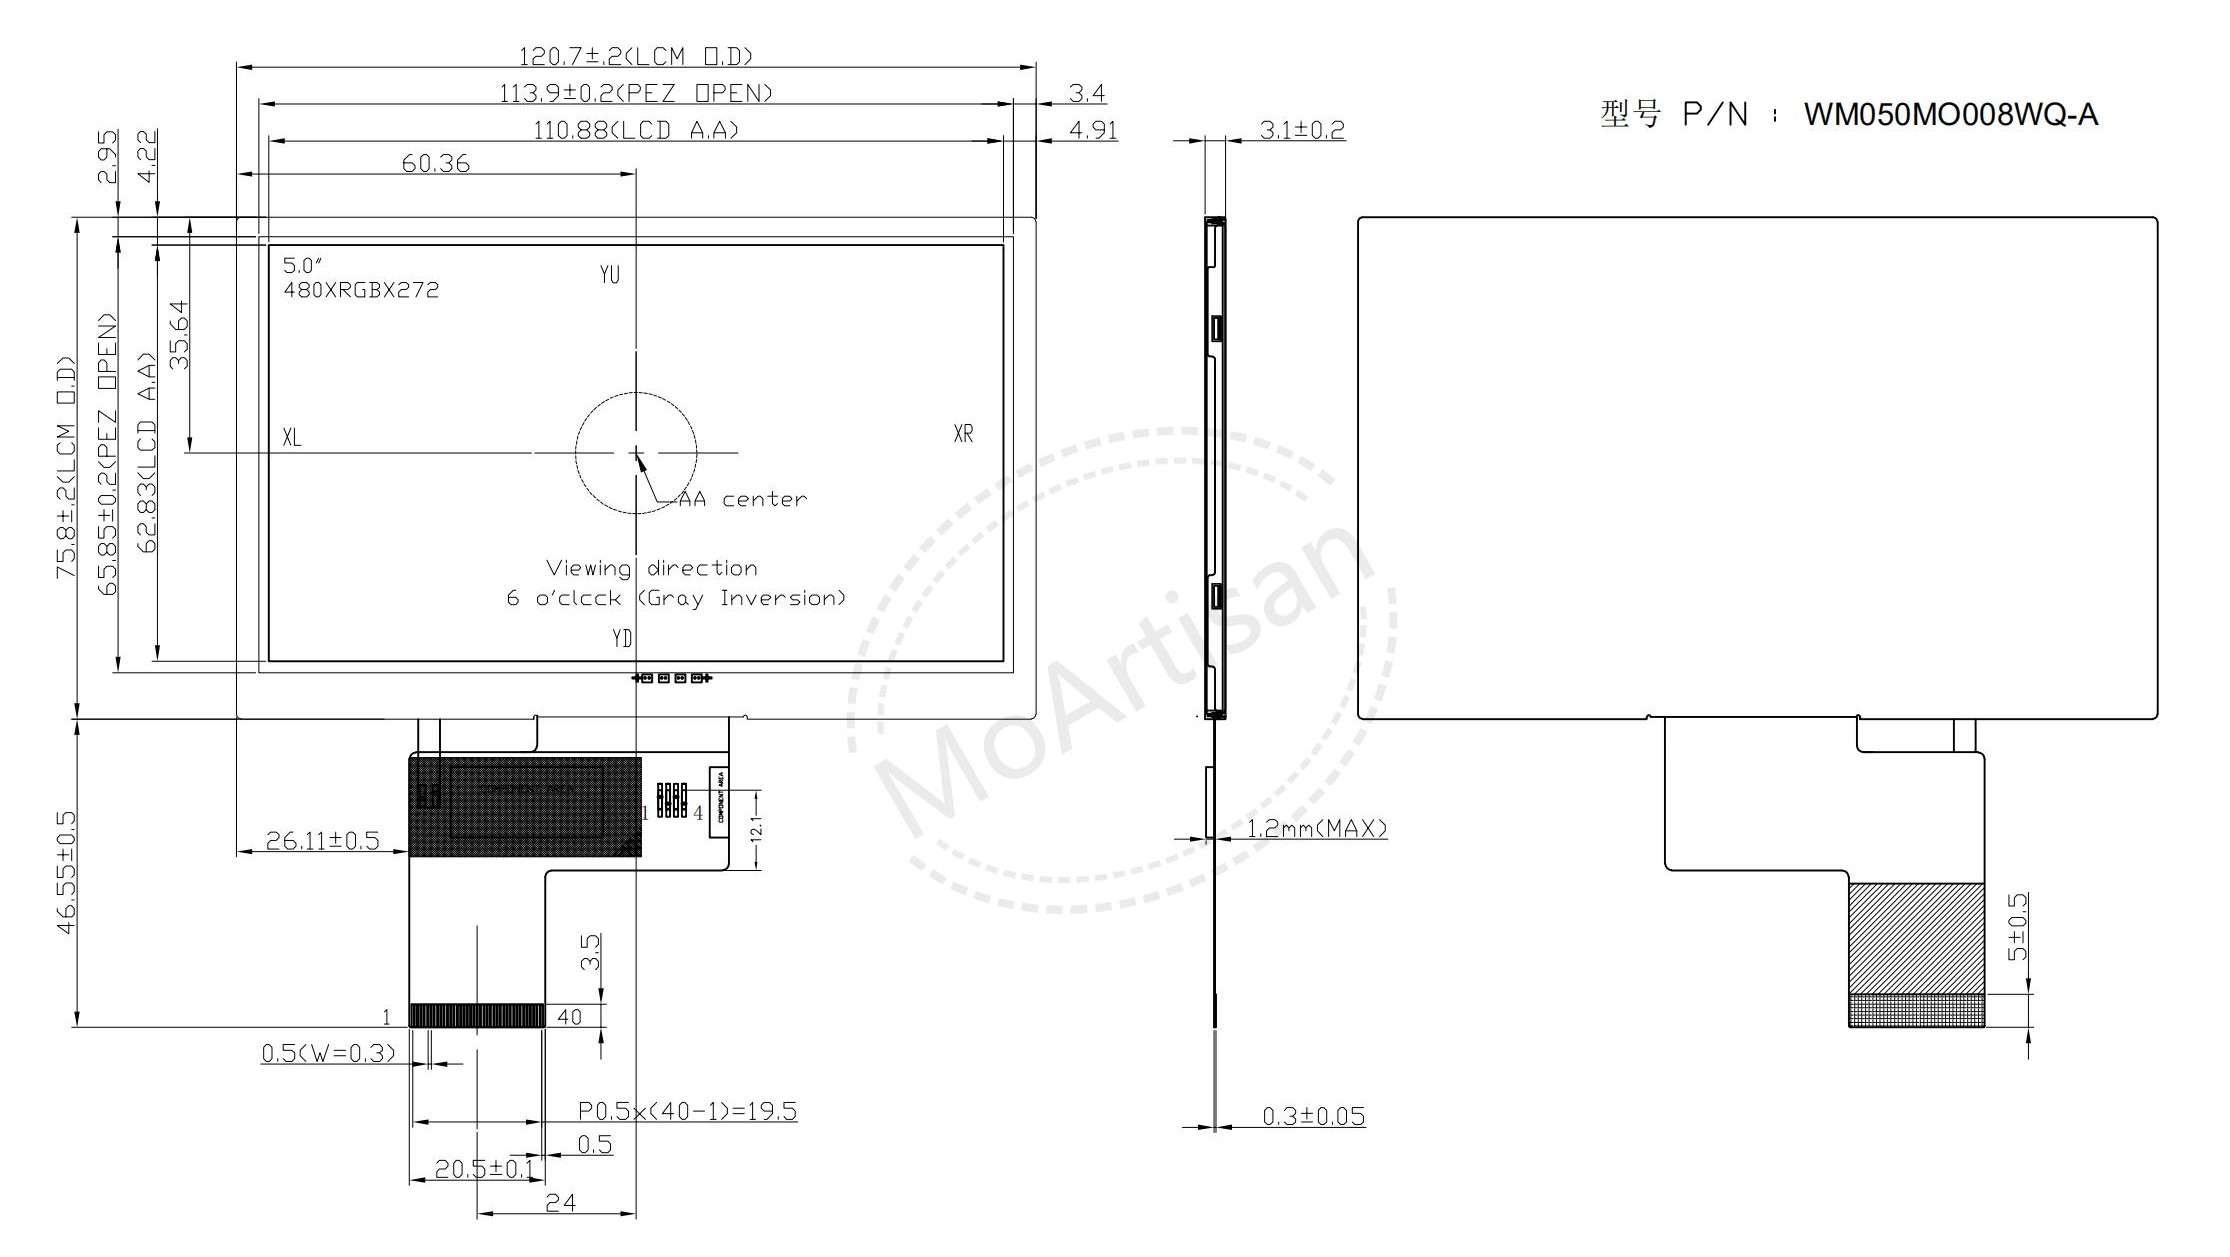 5.0 Inch TFT 480(RGB)*272 LCD module with 750 nits brightness Drawings